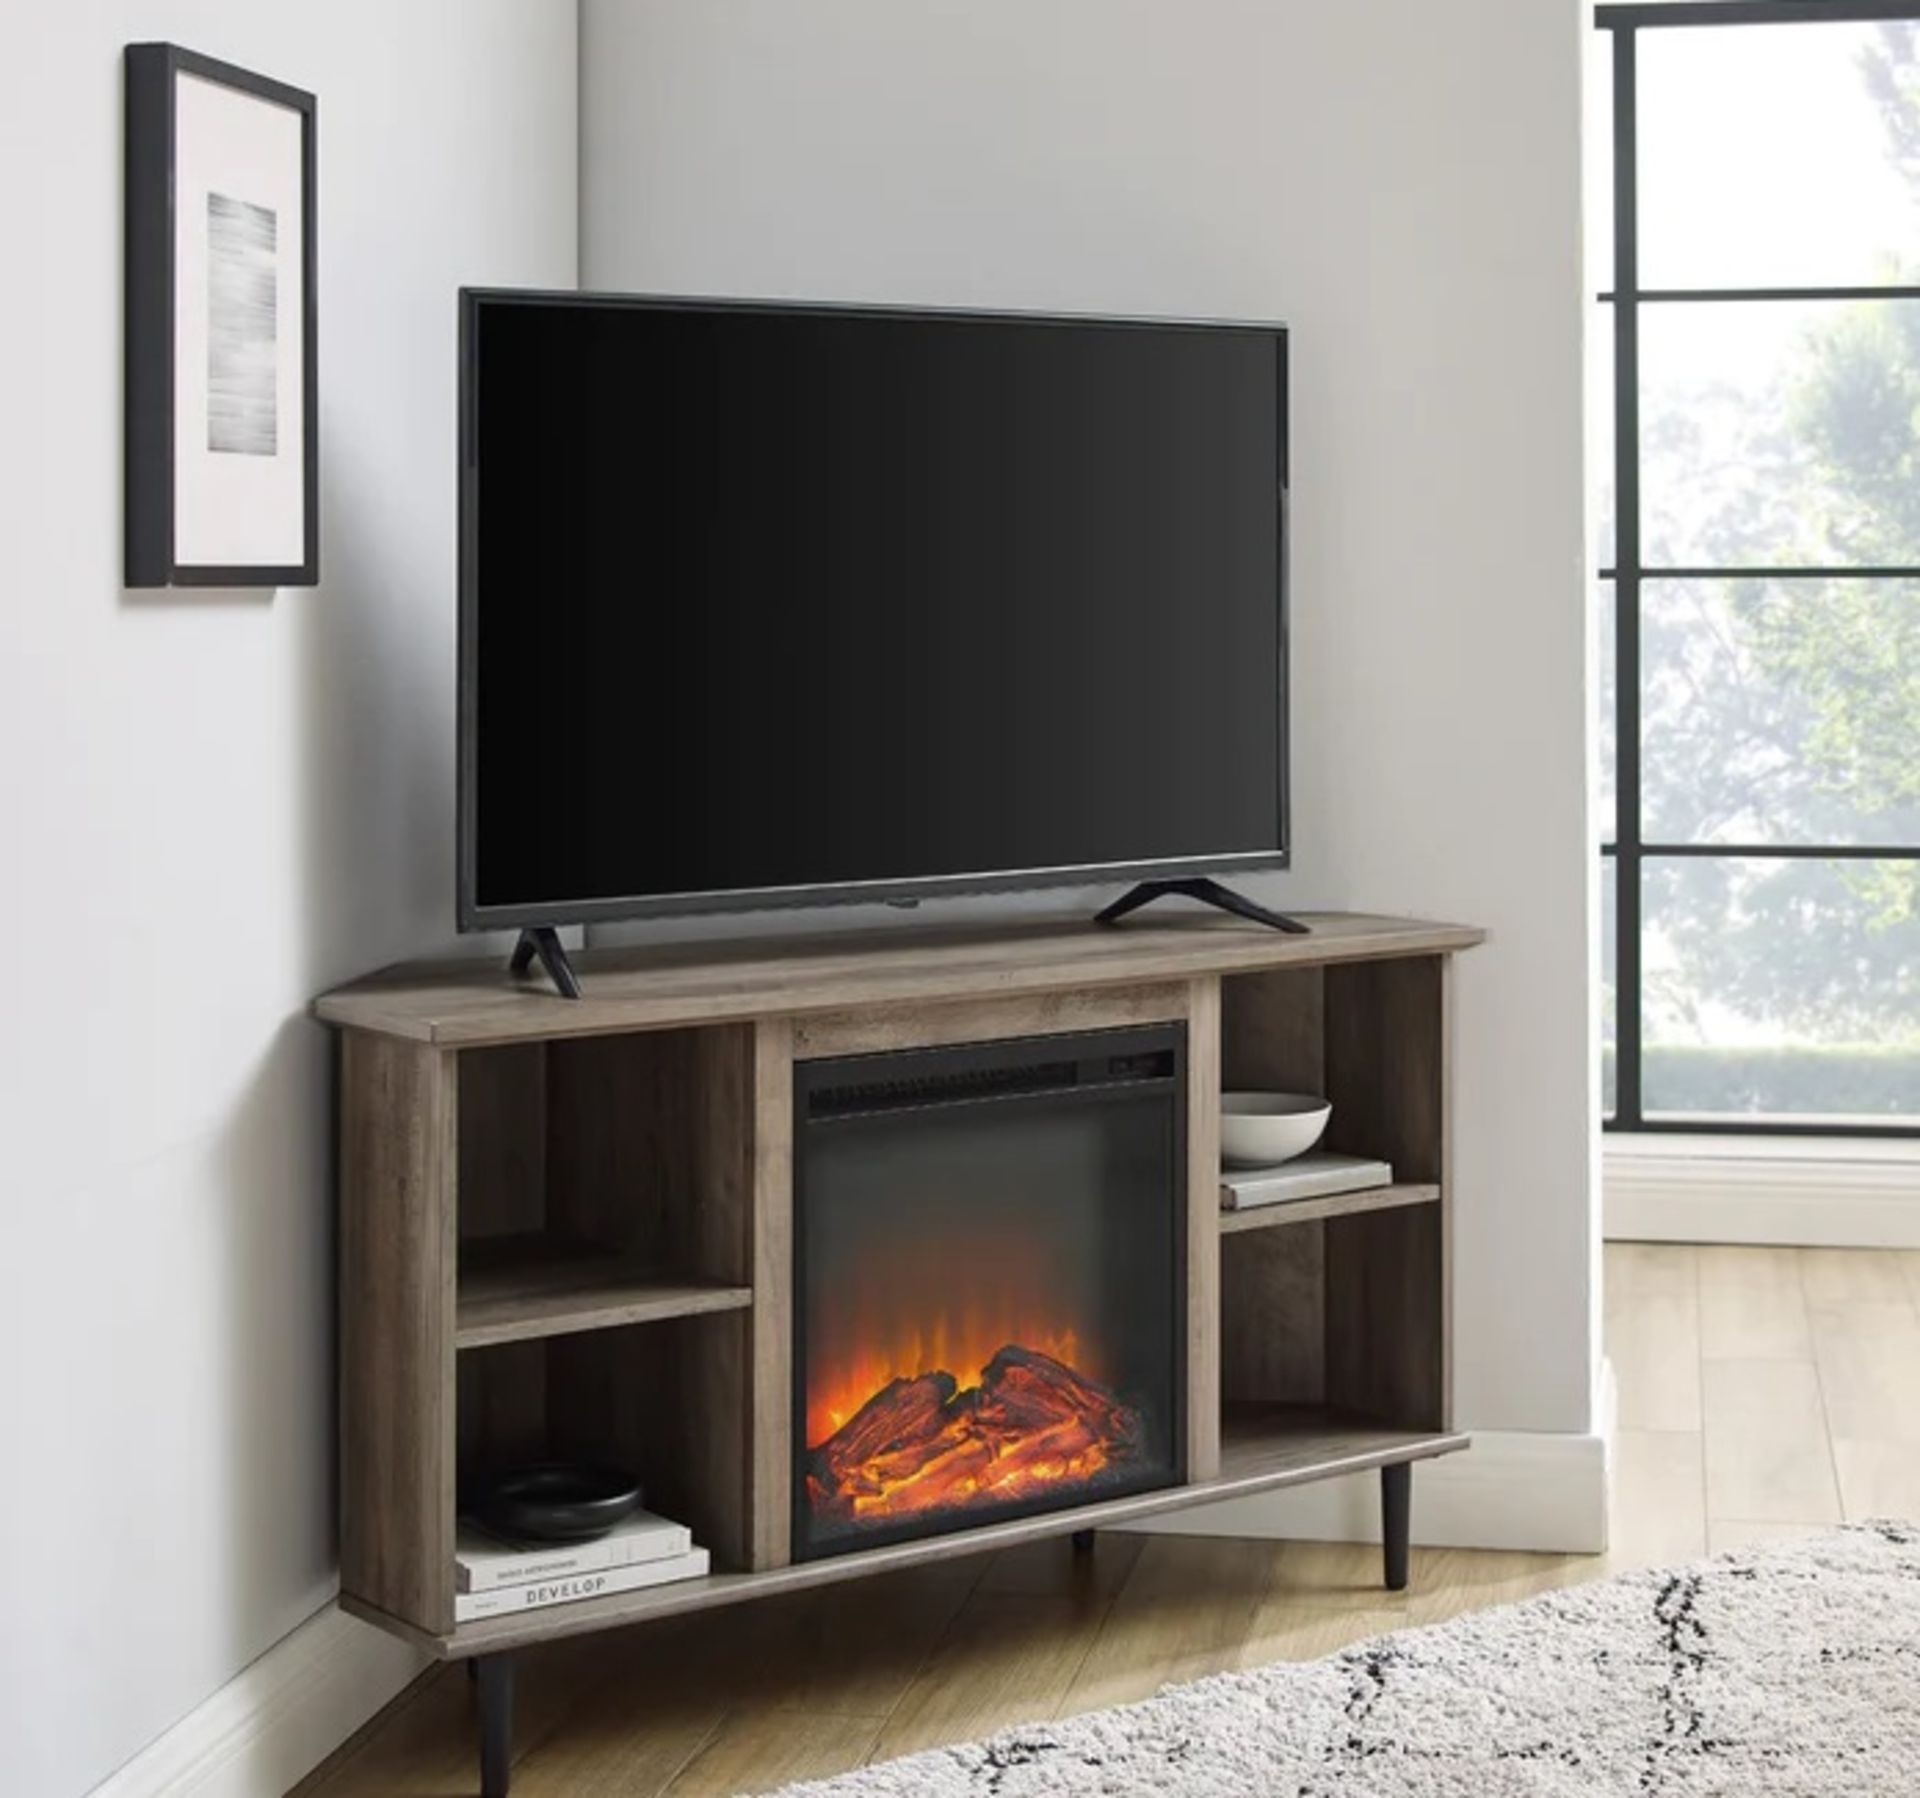 BRAND NEW GREY WASH FIREPLACE CORNER TV UNIT (WITH ELECTRIC FIRE INSERT) RRP £499